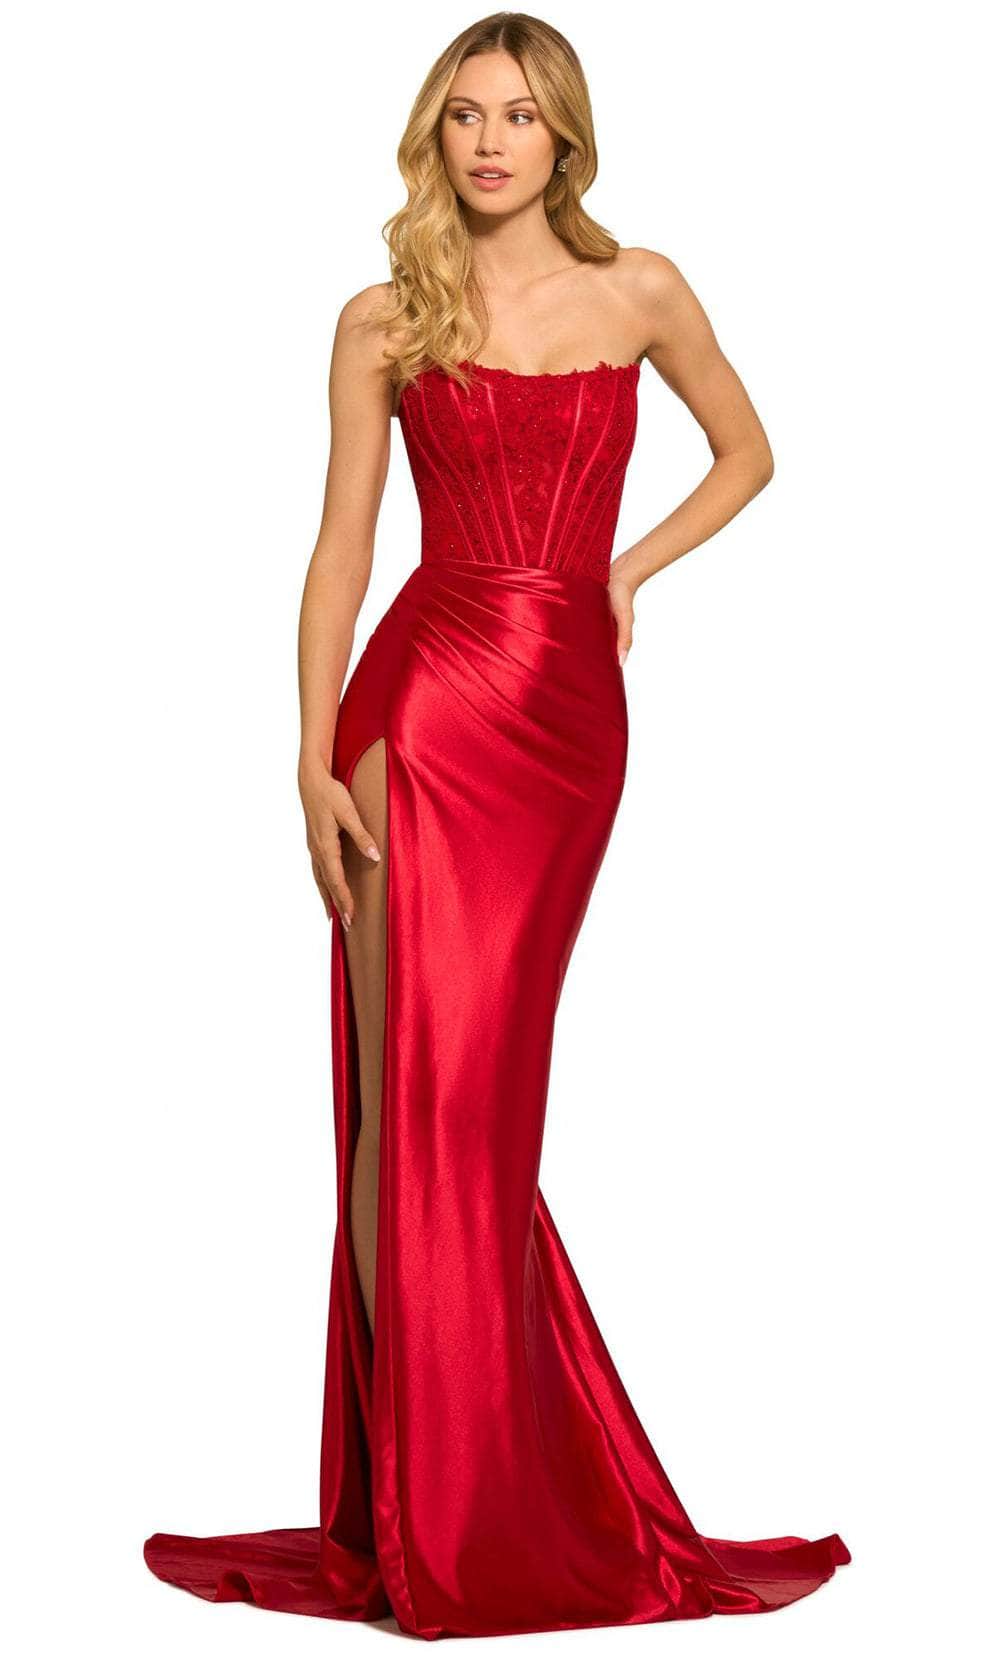 Sherri Hill 55419 - Corset Prom Dress with Slit Special Occasion Dress 000 / Red